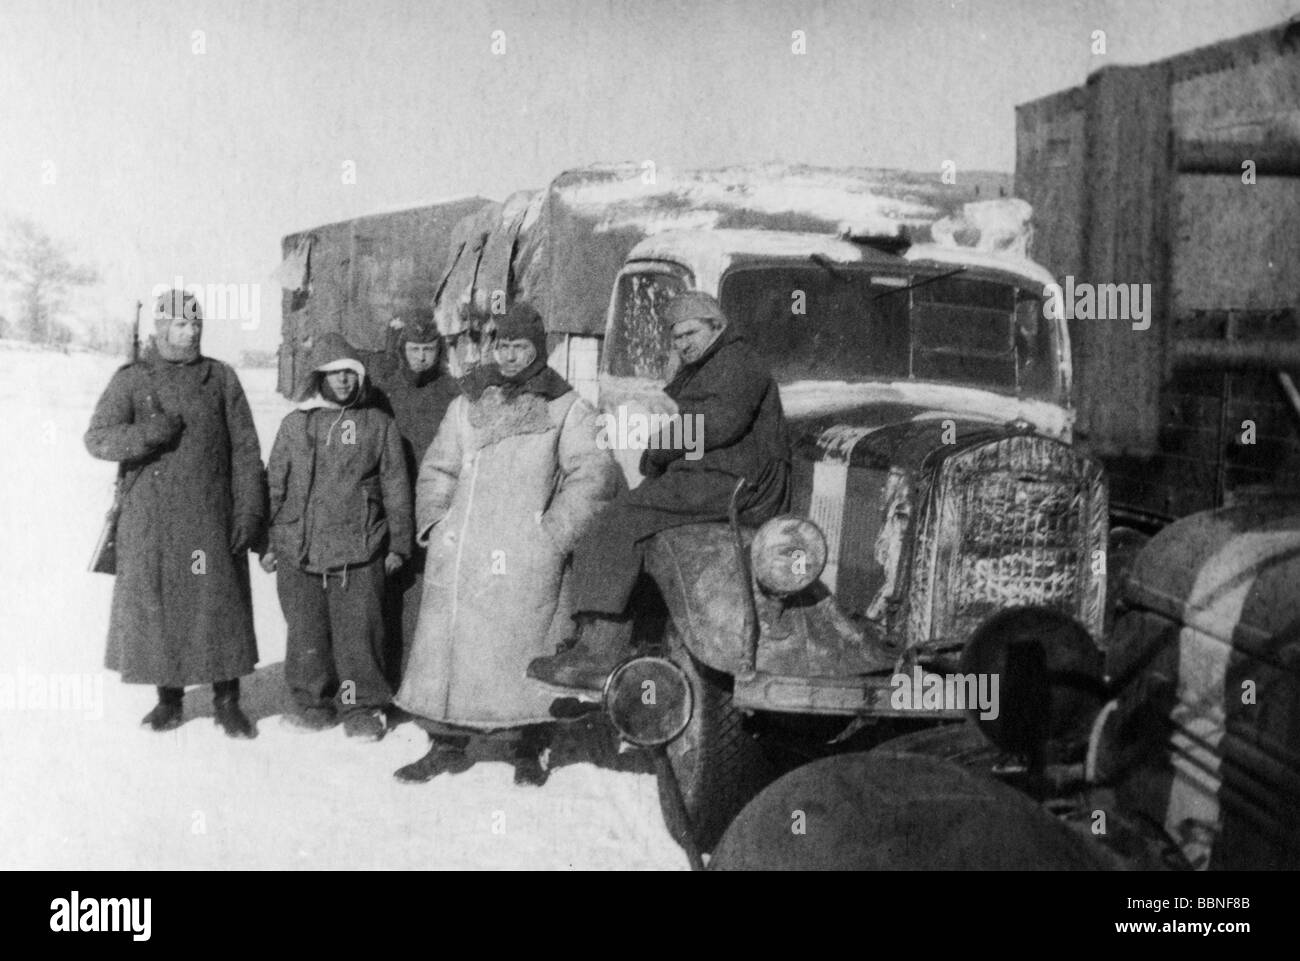 events, Second World War / WWII, Russia 1942 / 1943, German retreat to the Donets Basin, early February 1943, soldiers of a supply battalion at Kalinovka, 20th century, historic, historical, vehicle, vehicles, lorry, lorries, Wehrmacht, Third Reich, Eastern Front, Soviet Union, USSR, winter clothes, coats, clothing, snow, Donec, supplies, baggage, people, 1940s, Stock Photo